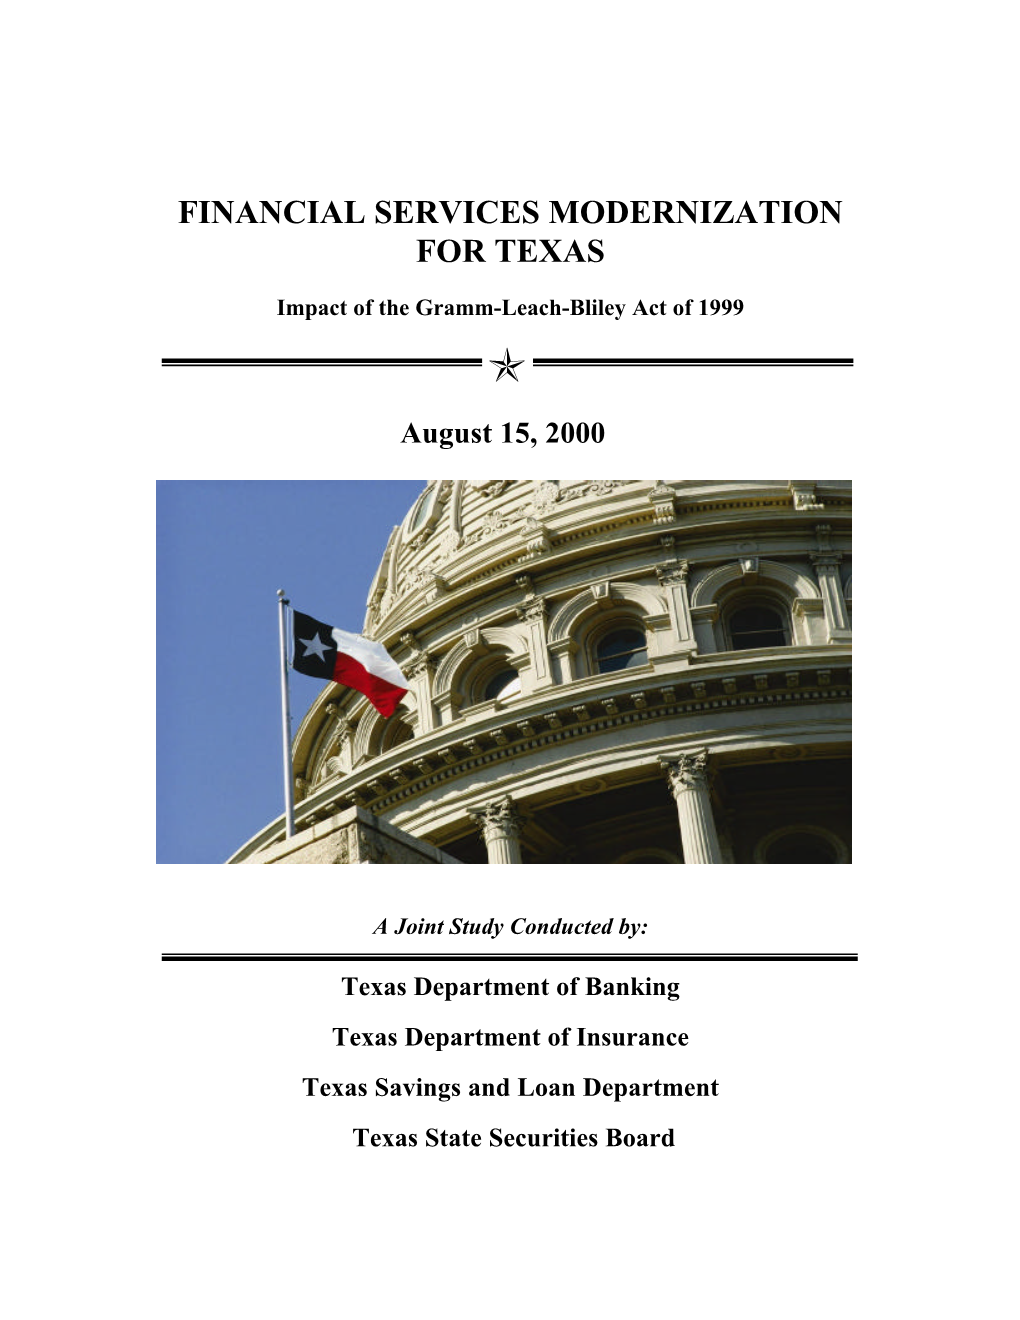 A Joint Commissioners' Study on Financial Services Modernization